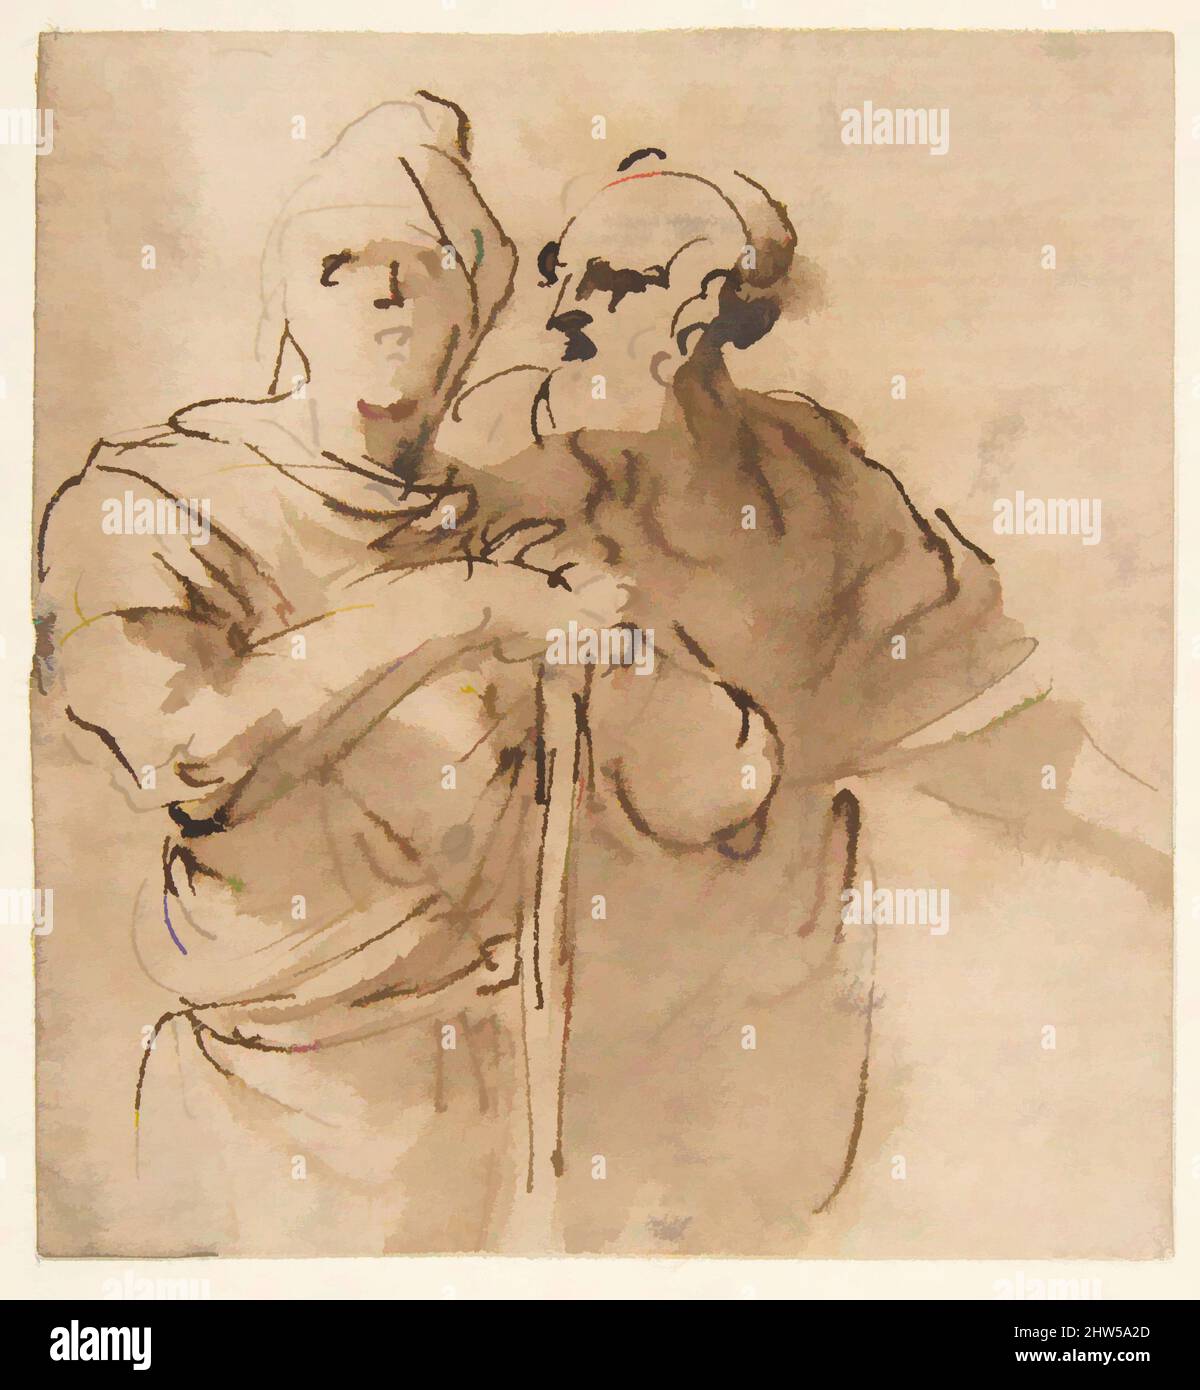 Art inspired by Two Men Seen Three- Quarter Length, 1615–73, Pen and brown ink, brown wash, 3-1/2 x 3-1/4 in. (8.8 x 8.2 cm), Drawings, Salvator Rosa (Italian, Arenella (Naples) 1615–1673 Rome, Classic works modernized by Artotop with a splash of modernity. Shapes, color and value, eye-catching visual impact on art. Emotions through freedom of artworks in a contemporary way. A timeless message pursuing a wildly creative new direction. Artists turning to the digital medium and creating the Artotop NFT Stock Photo